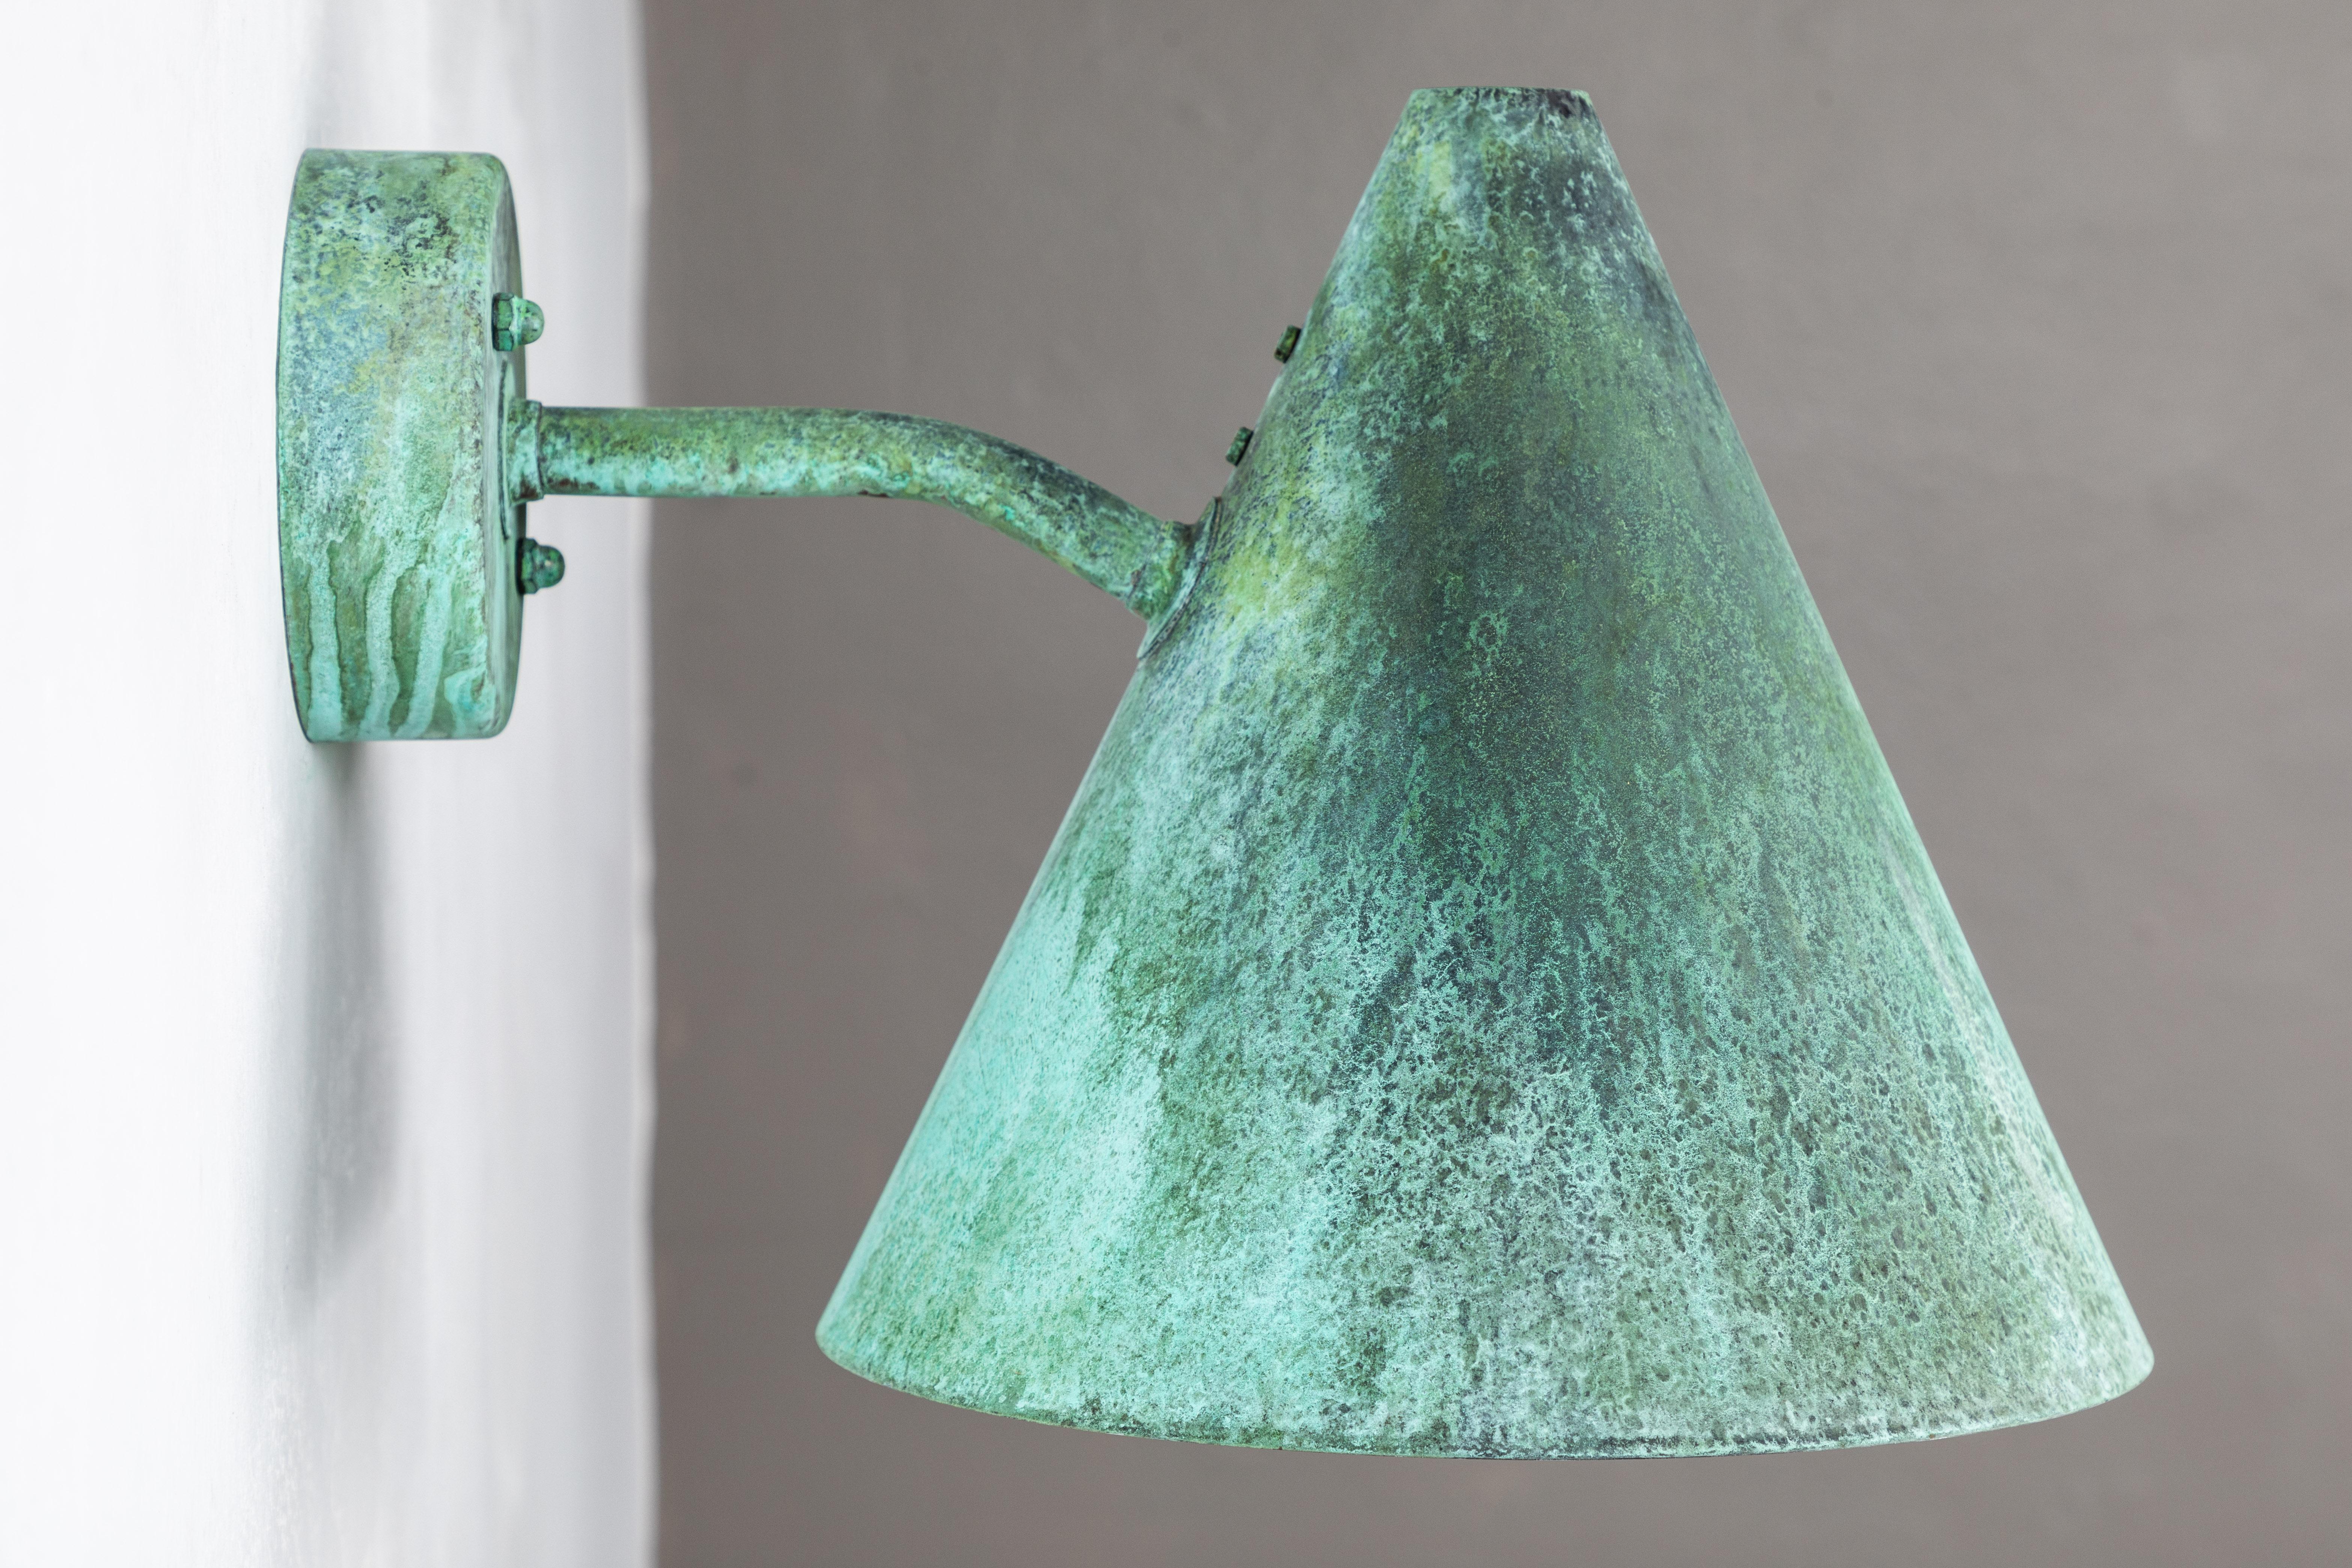 Pair of Hans-Agne Jakobsson 'Tratten' Verdigris Patinated Outdoor Sconces For Sale 1